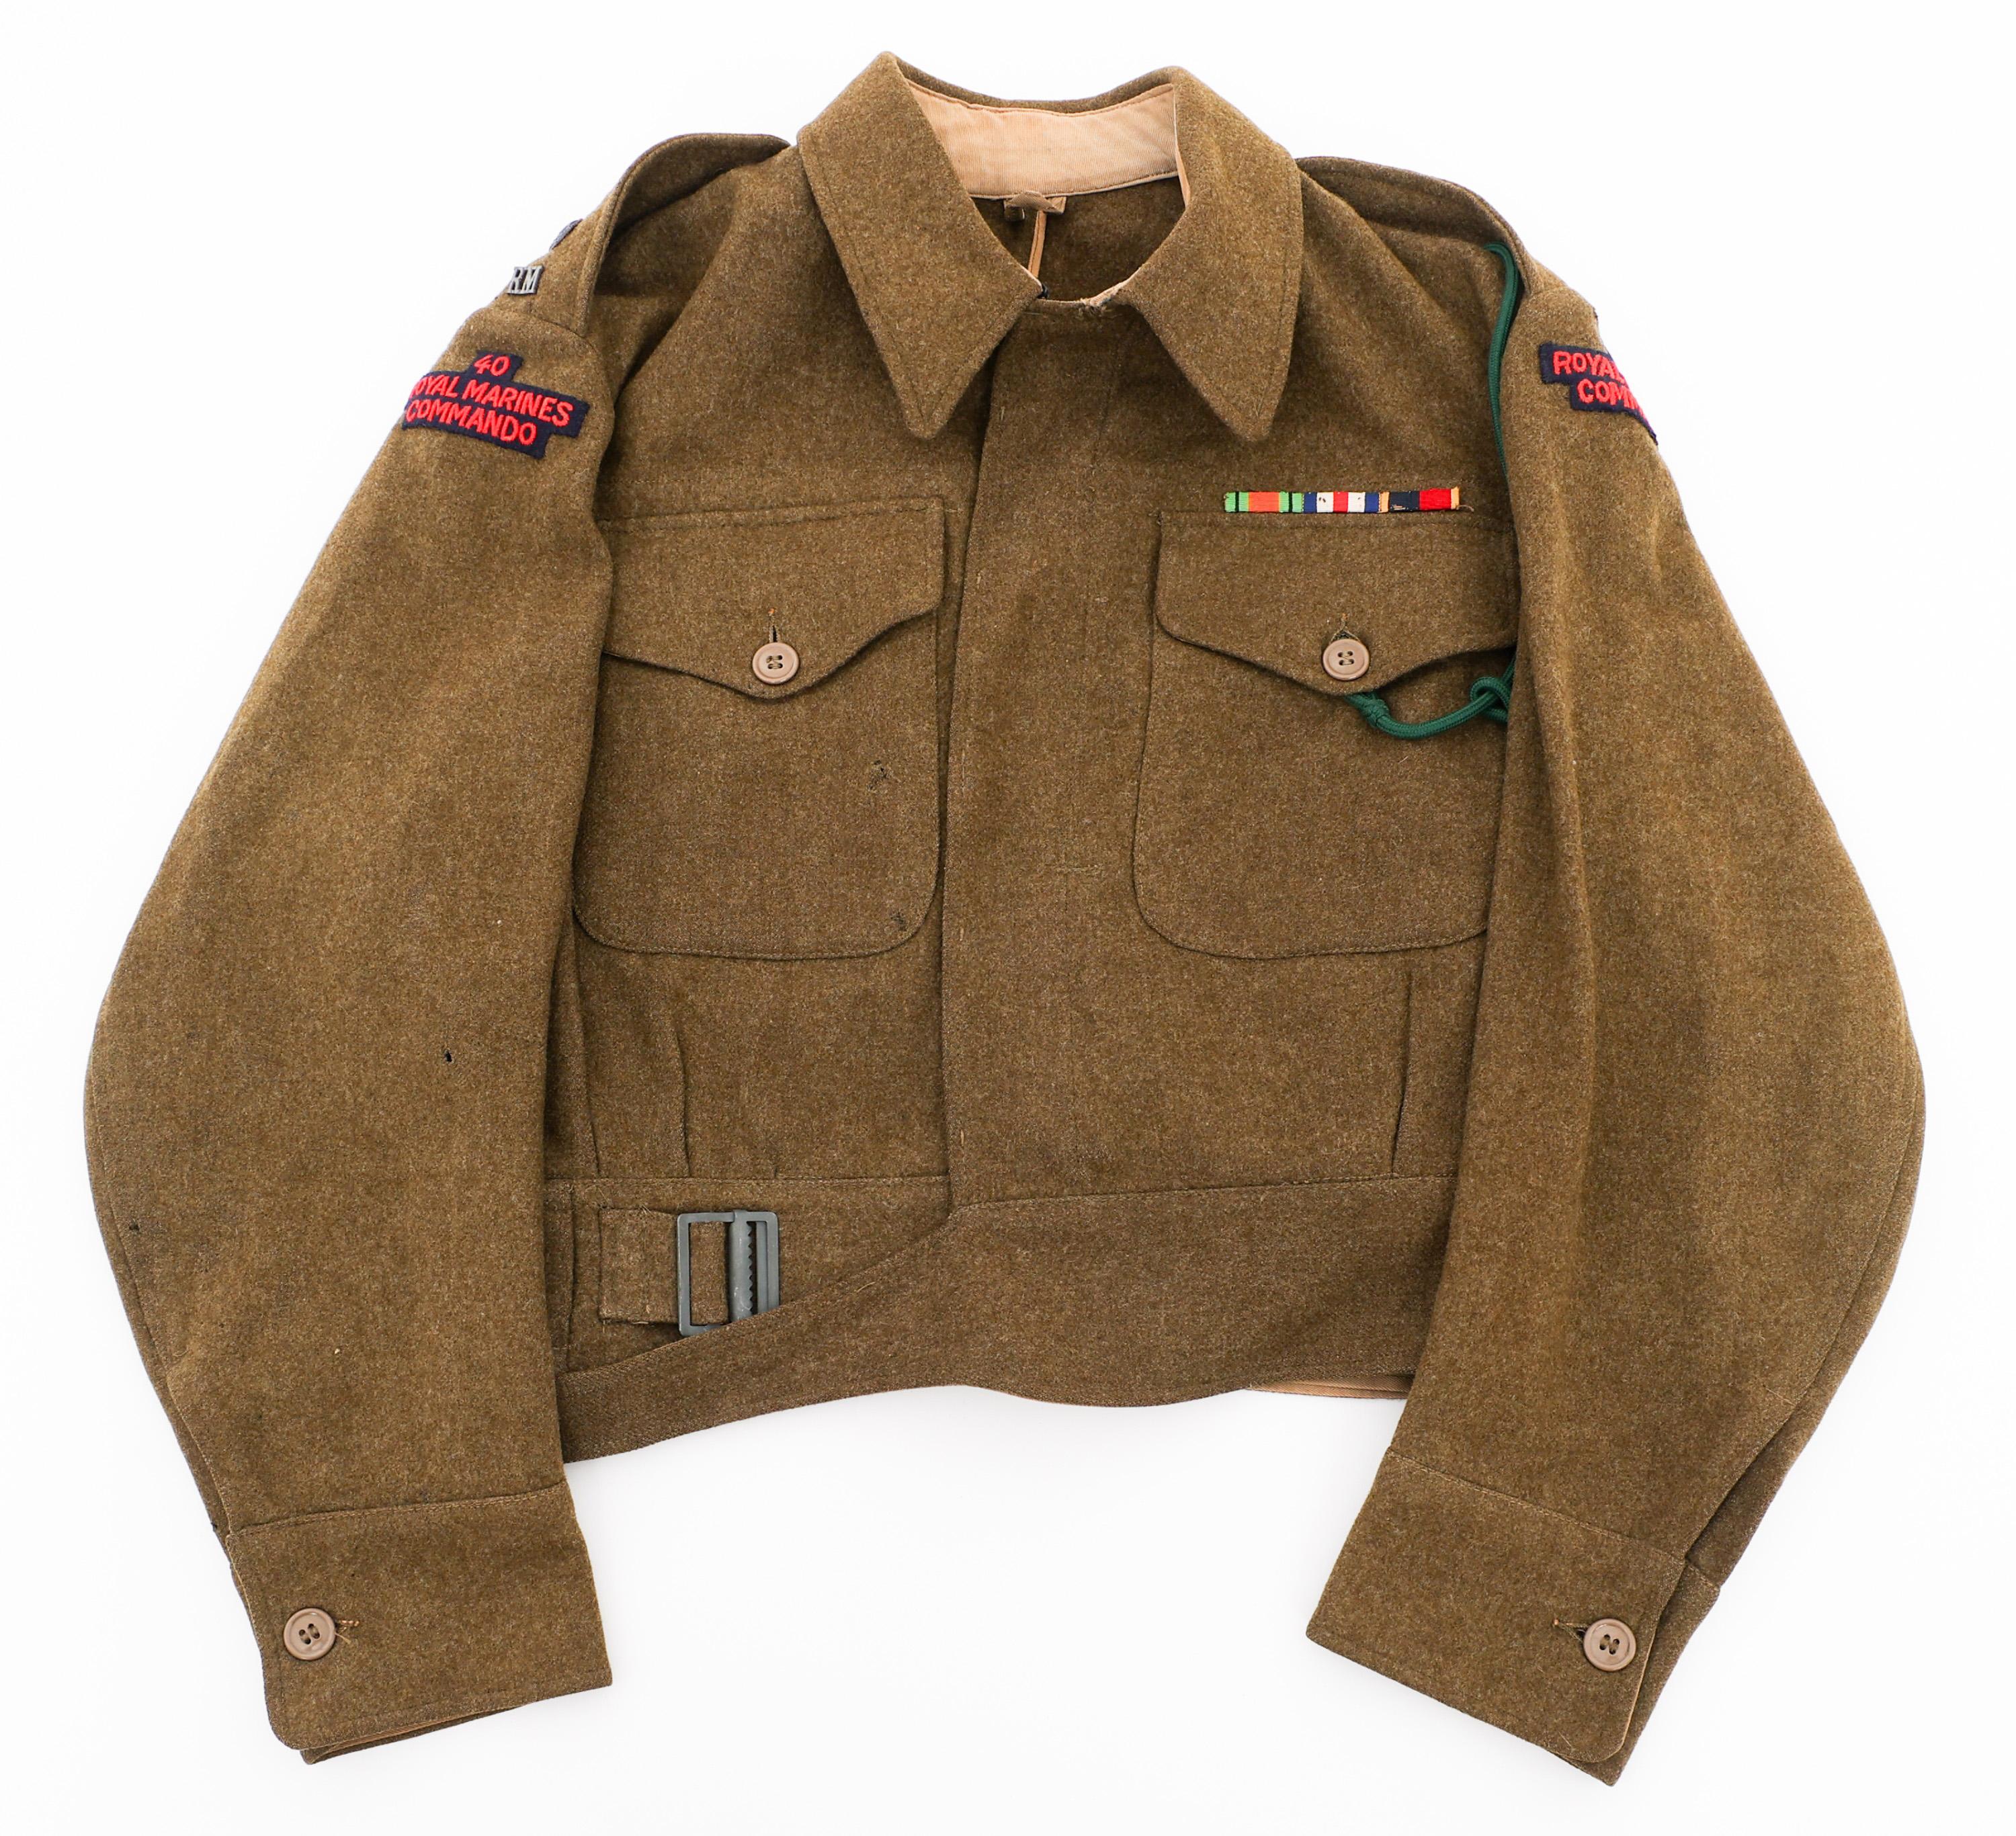 WWII BRITISH RM 40 COMMANDO OFFICER BLOUSE & BERET